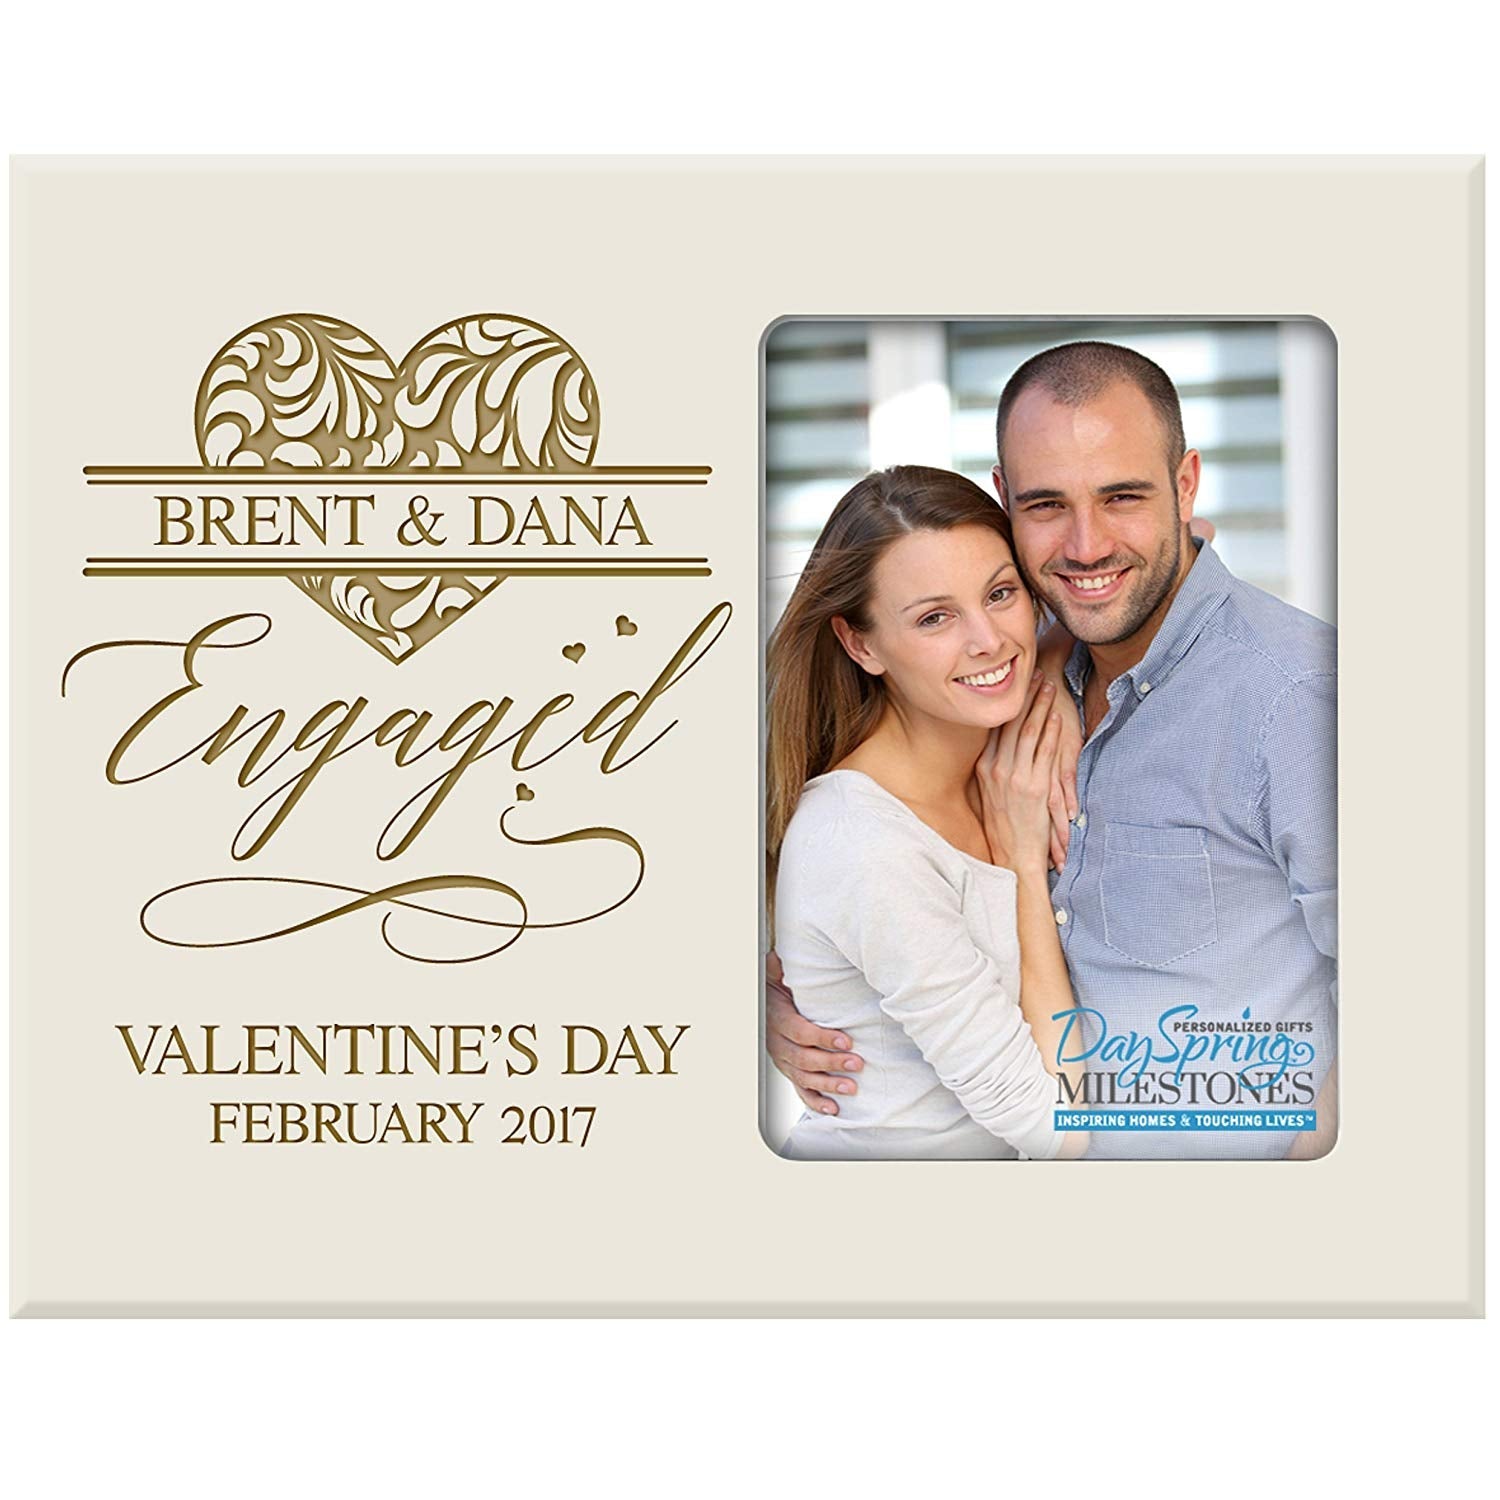 Personalized Valentine's Day Frames - Engaged - LifeSong Milestones